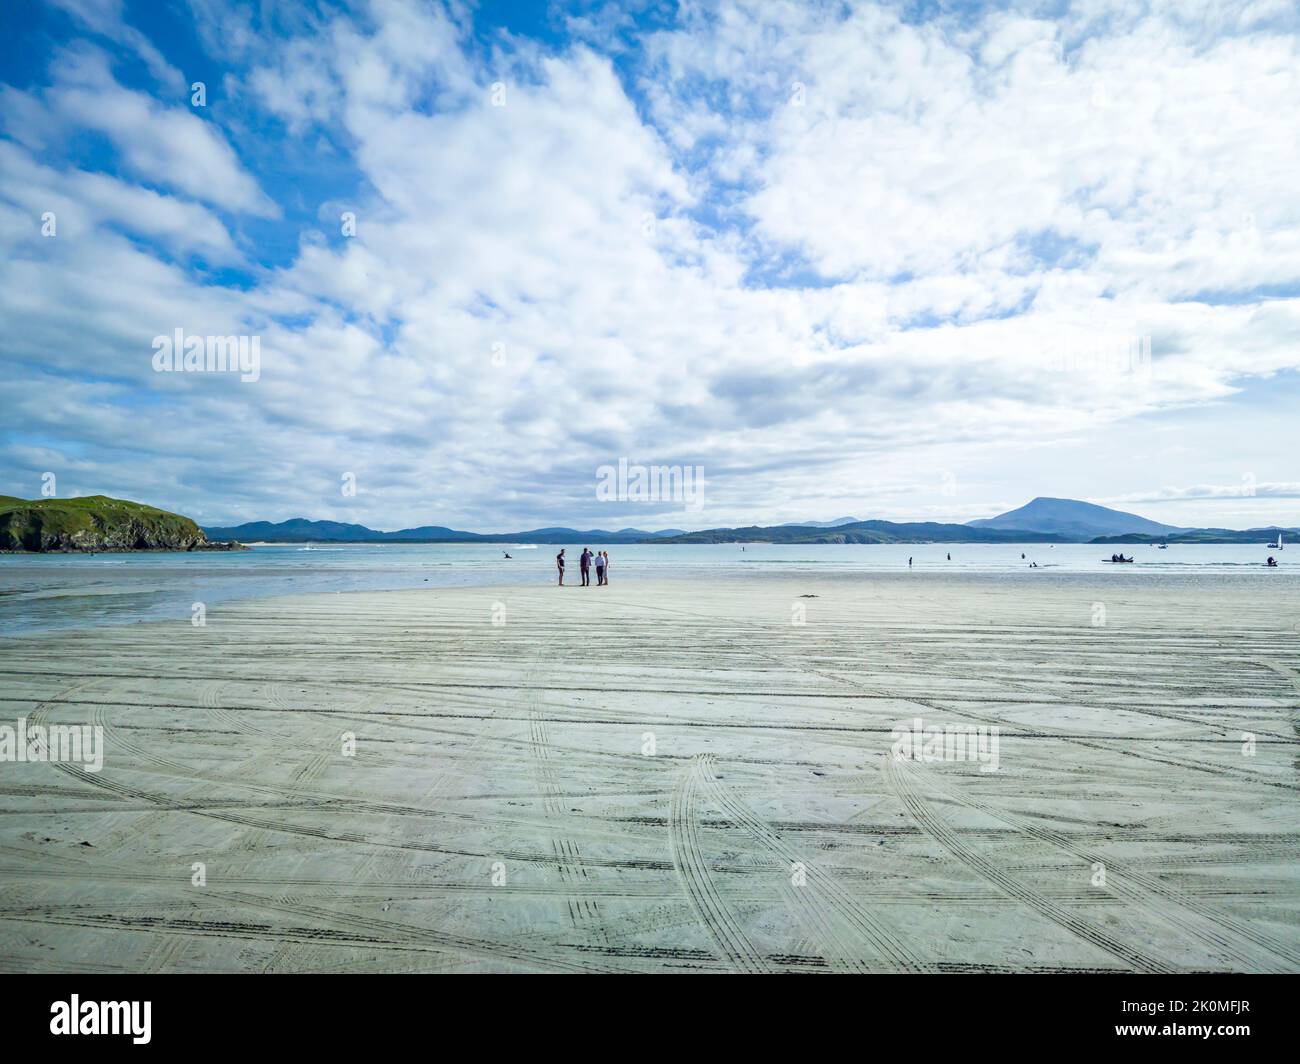 DOWNINGS, COUNTY DONEGAL, IRELAND - AUGUST 18 2022 : The beach is busy during the summer. Stock Photo